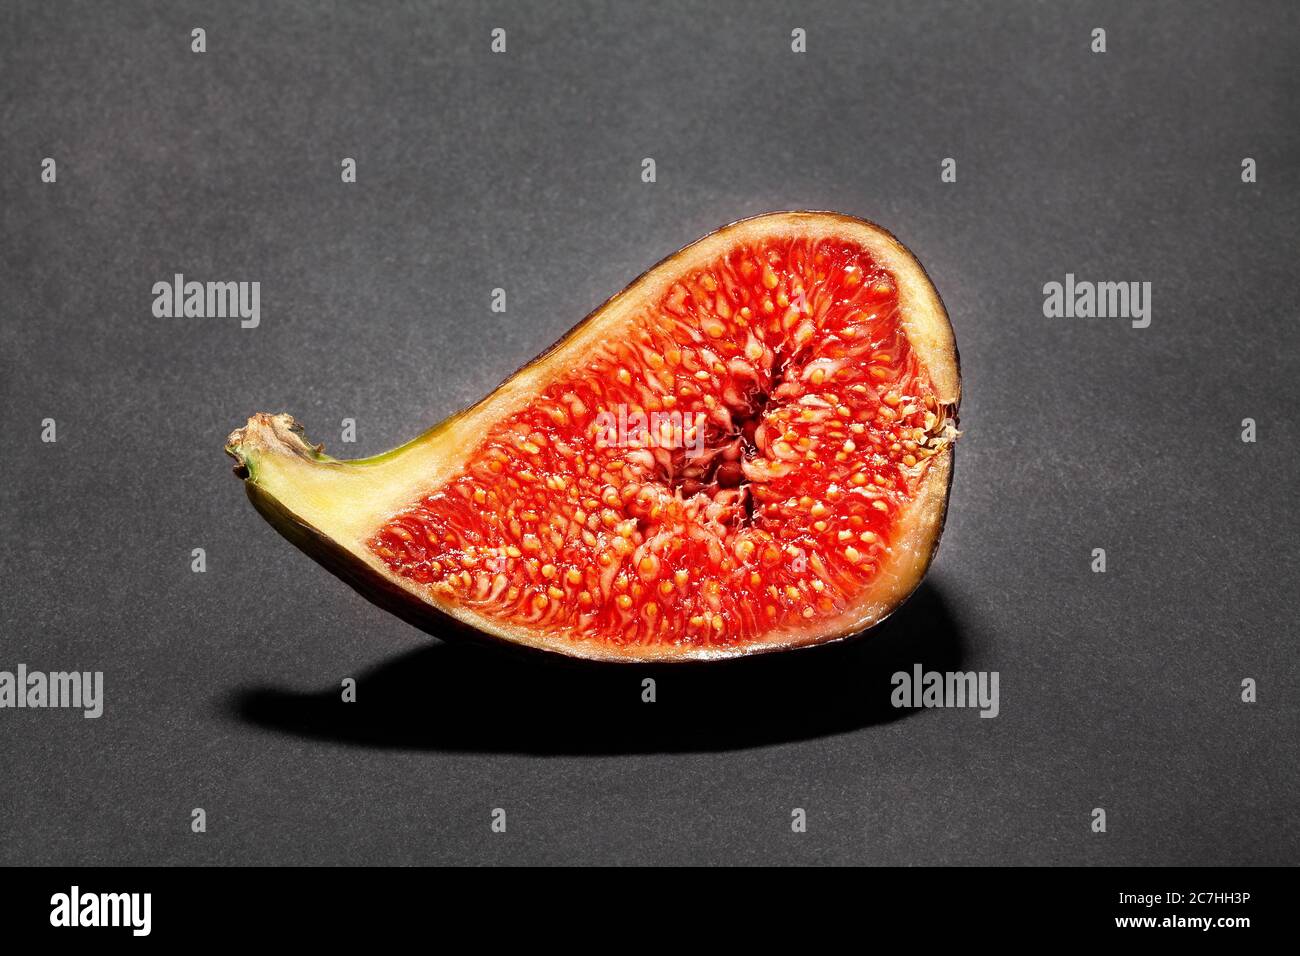 sliced figs on black background Stock Photo